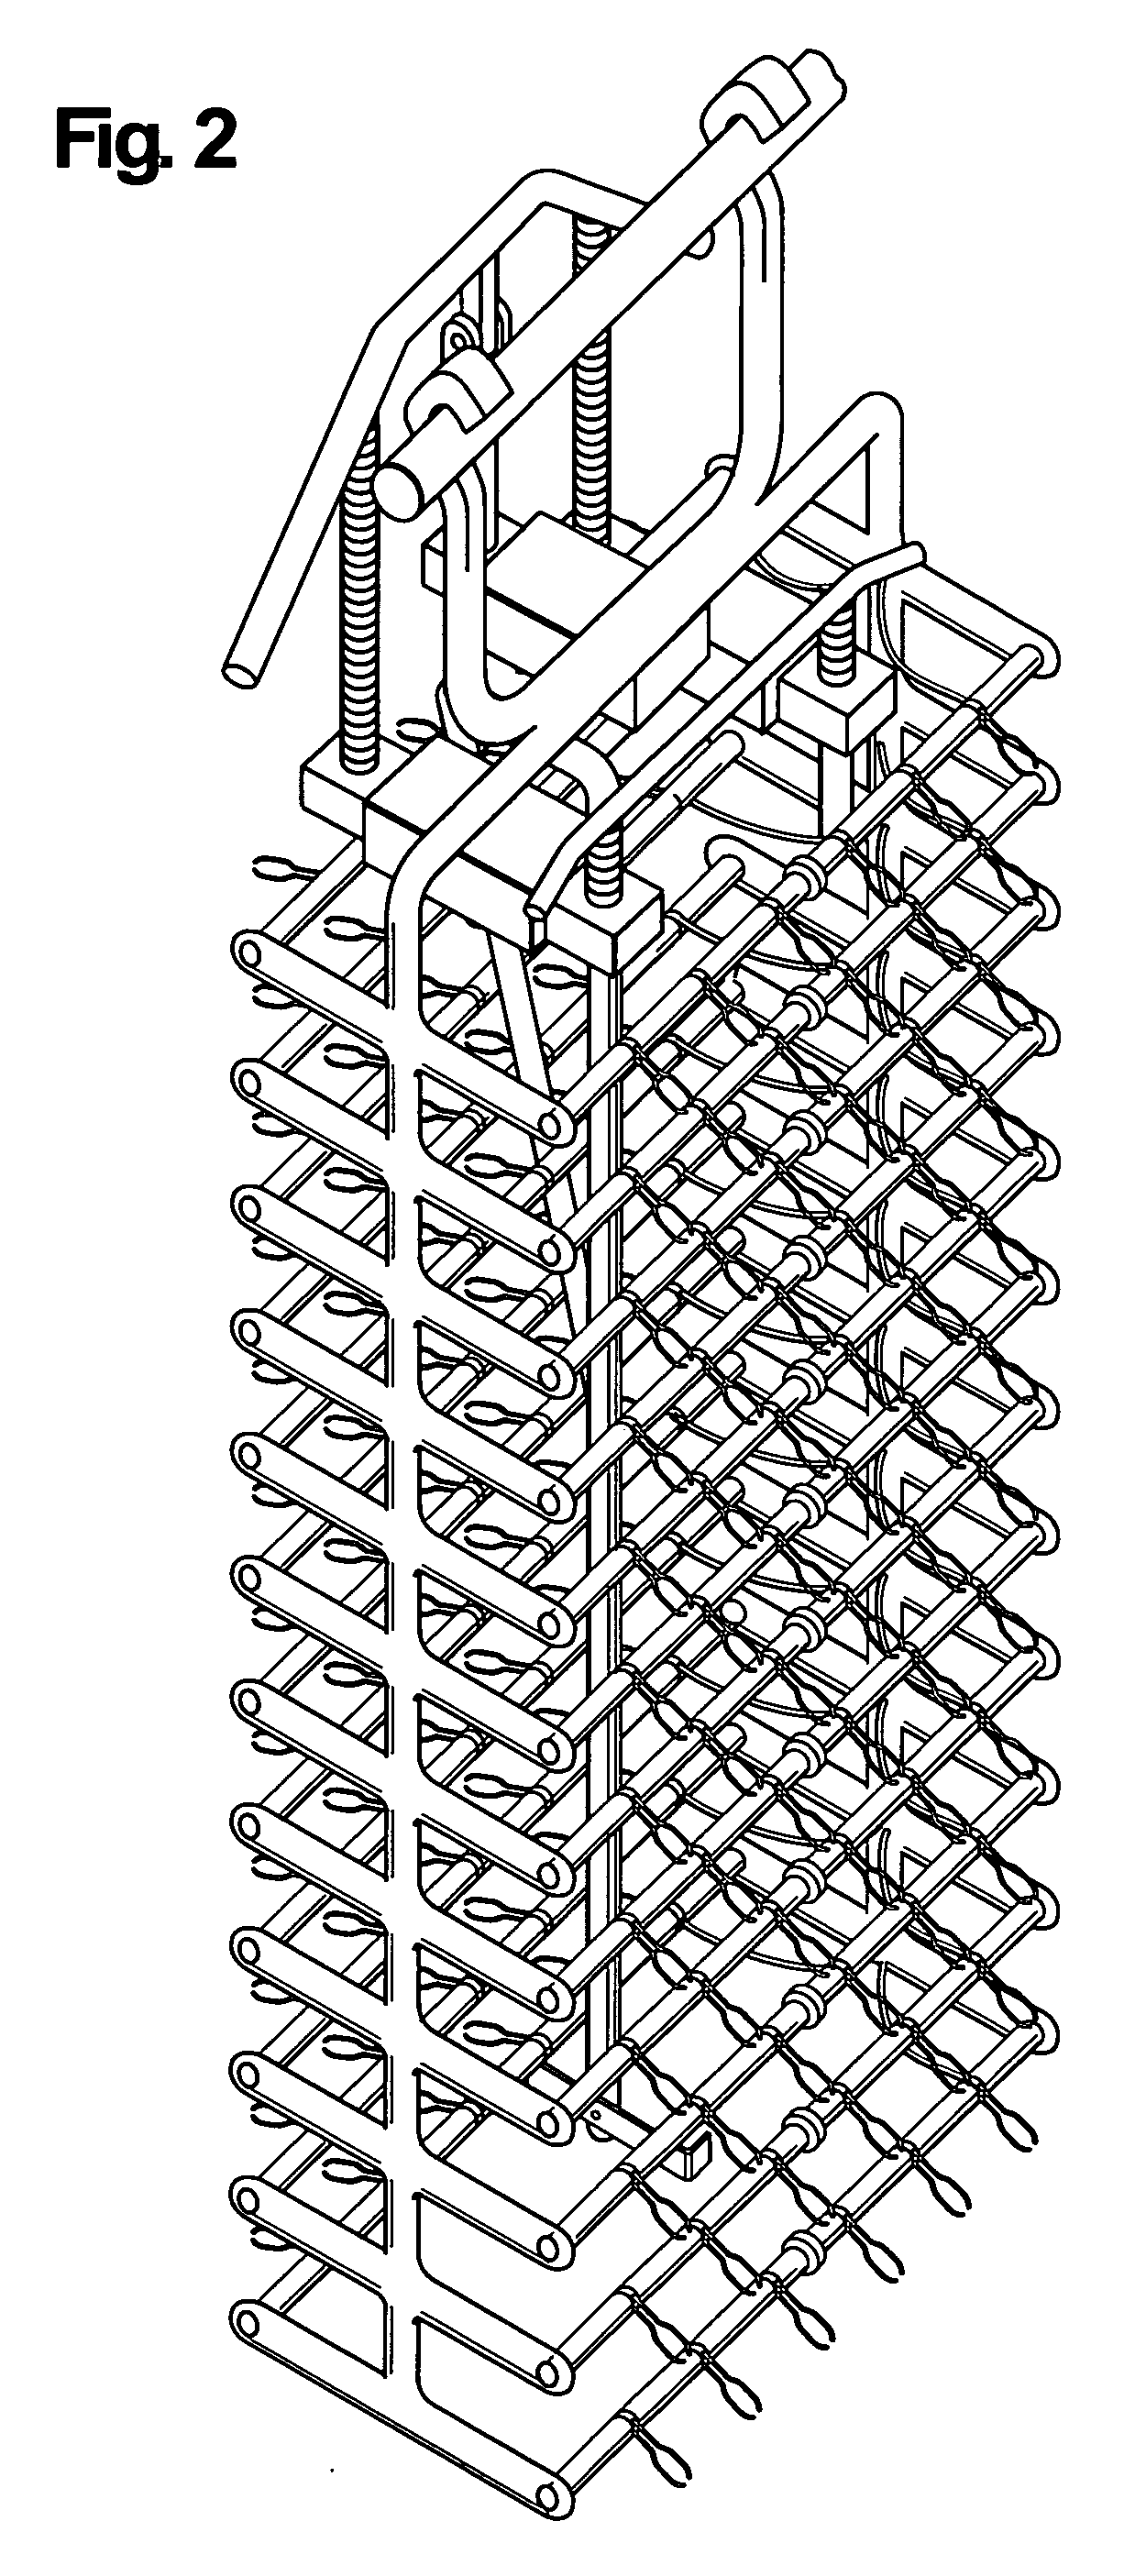 Method and apparatus for plating metal parts